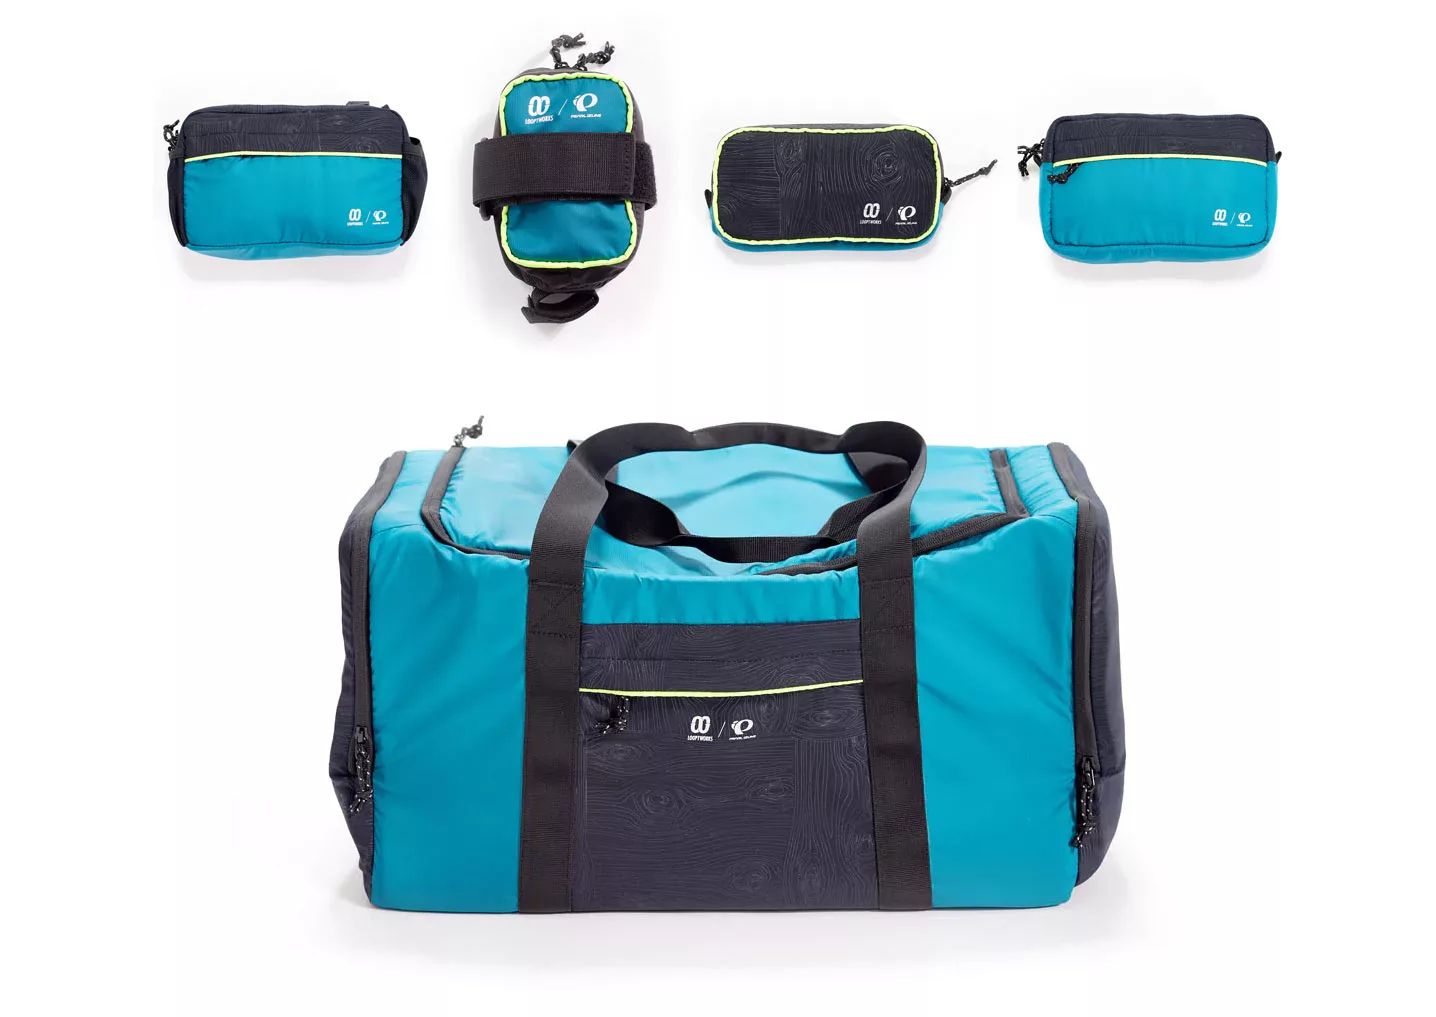 pearl izumi loopworx upcycled collection of cycling bags and packs